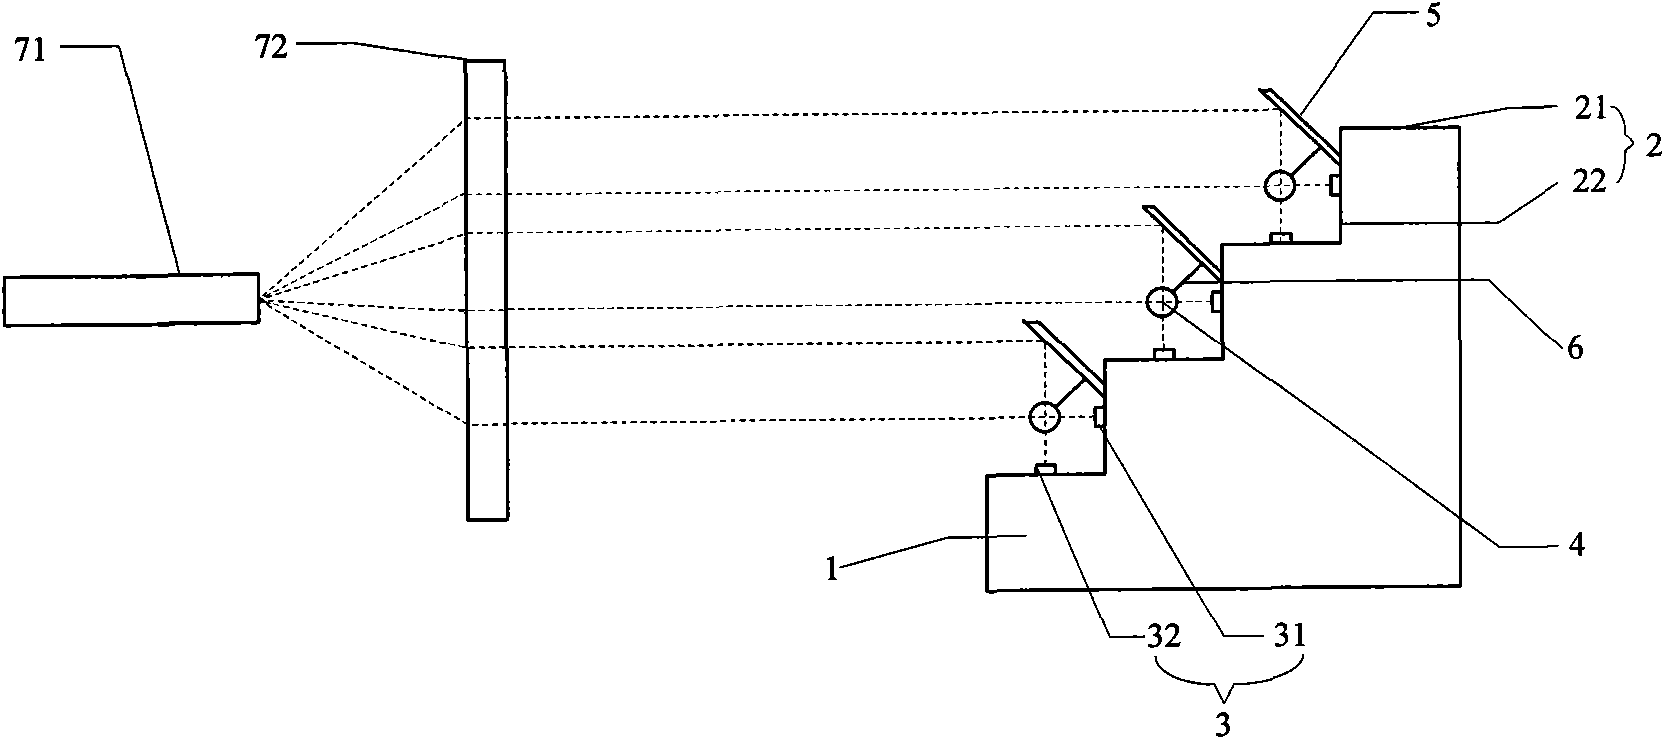 Semiconductor laser source